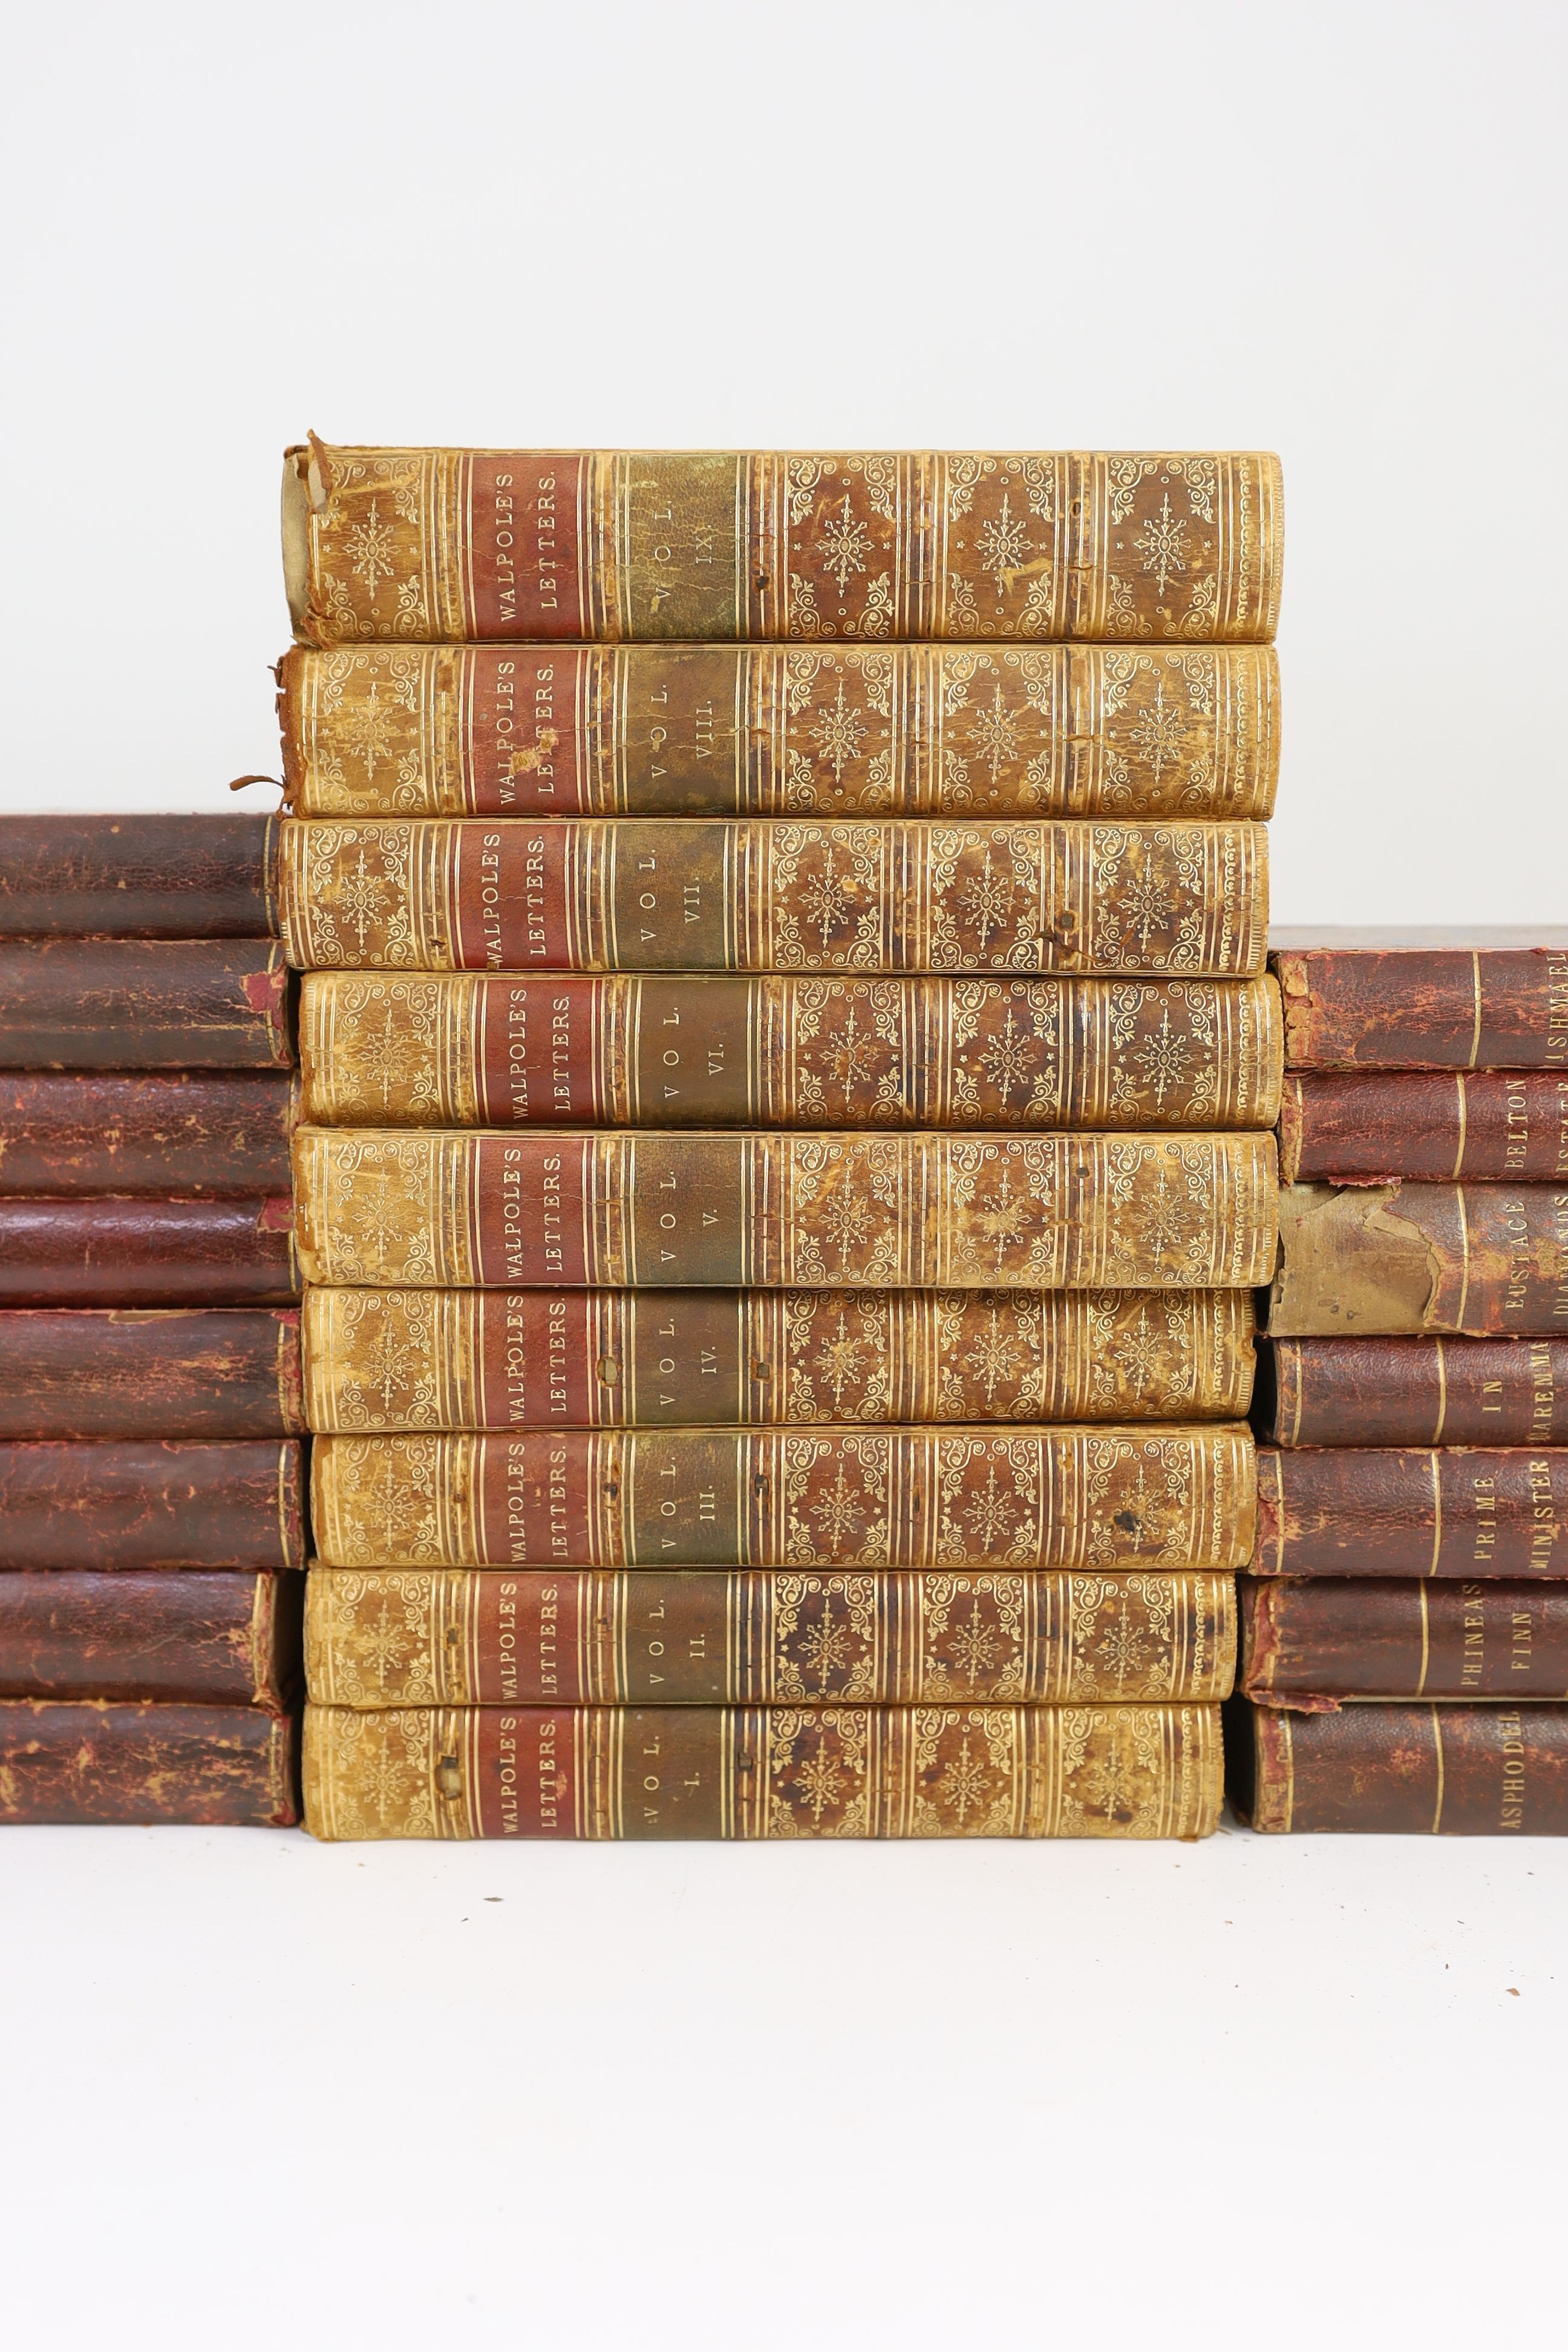 Walpole, Horace - The Letters of Horace Walpole, Earl of Orford, edited by Peter Cunningham, 9 vols, 8vo, tree calf, Henry G. Bohn, London, 1861, together with Trollope, Anthony - Works, 15 vols, 8vo, half morocco, Londo